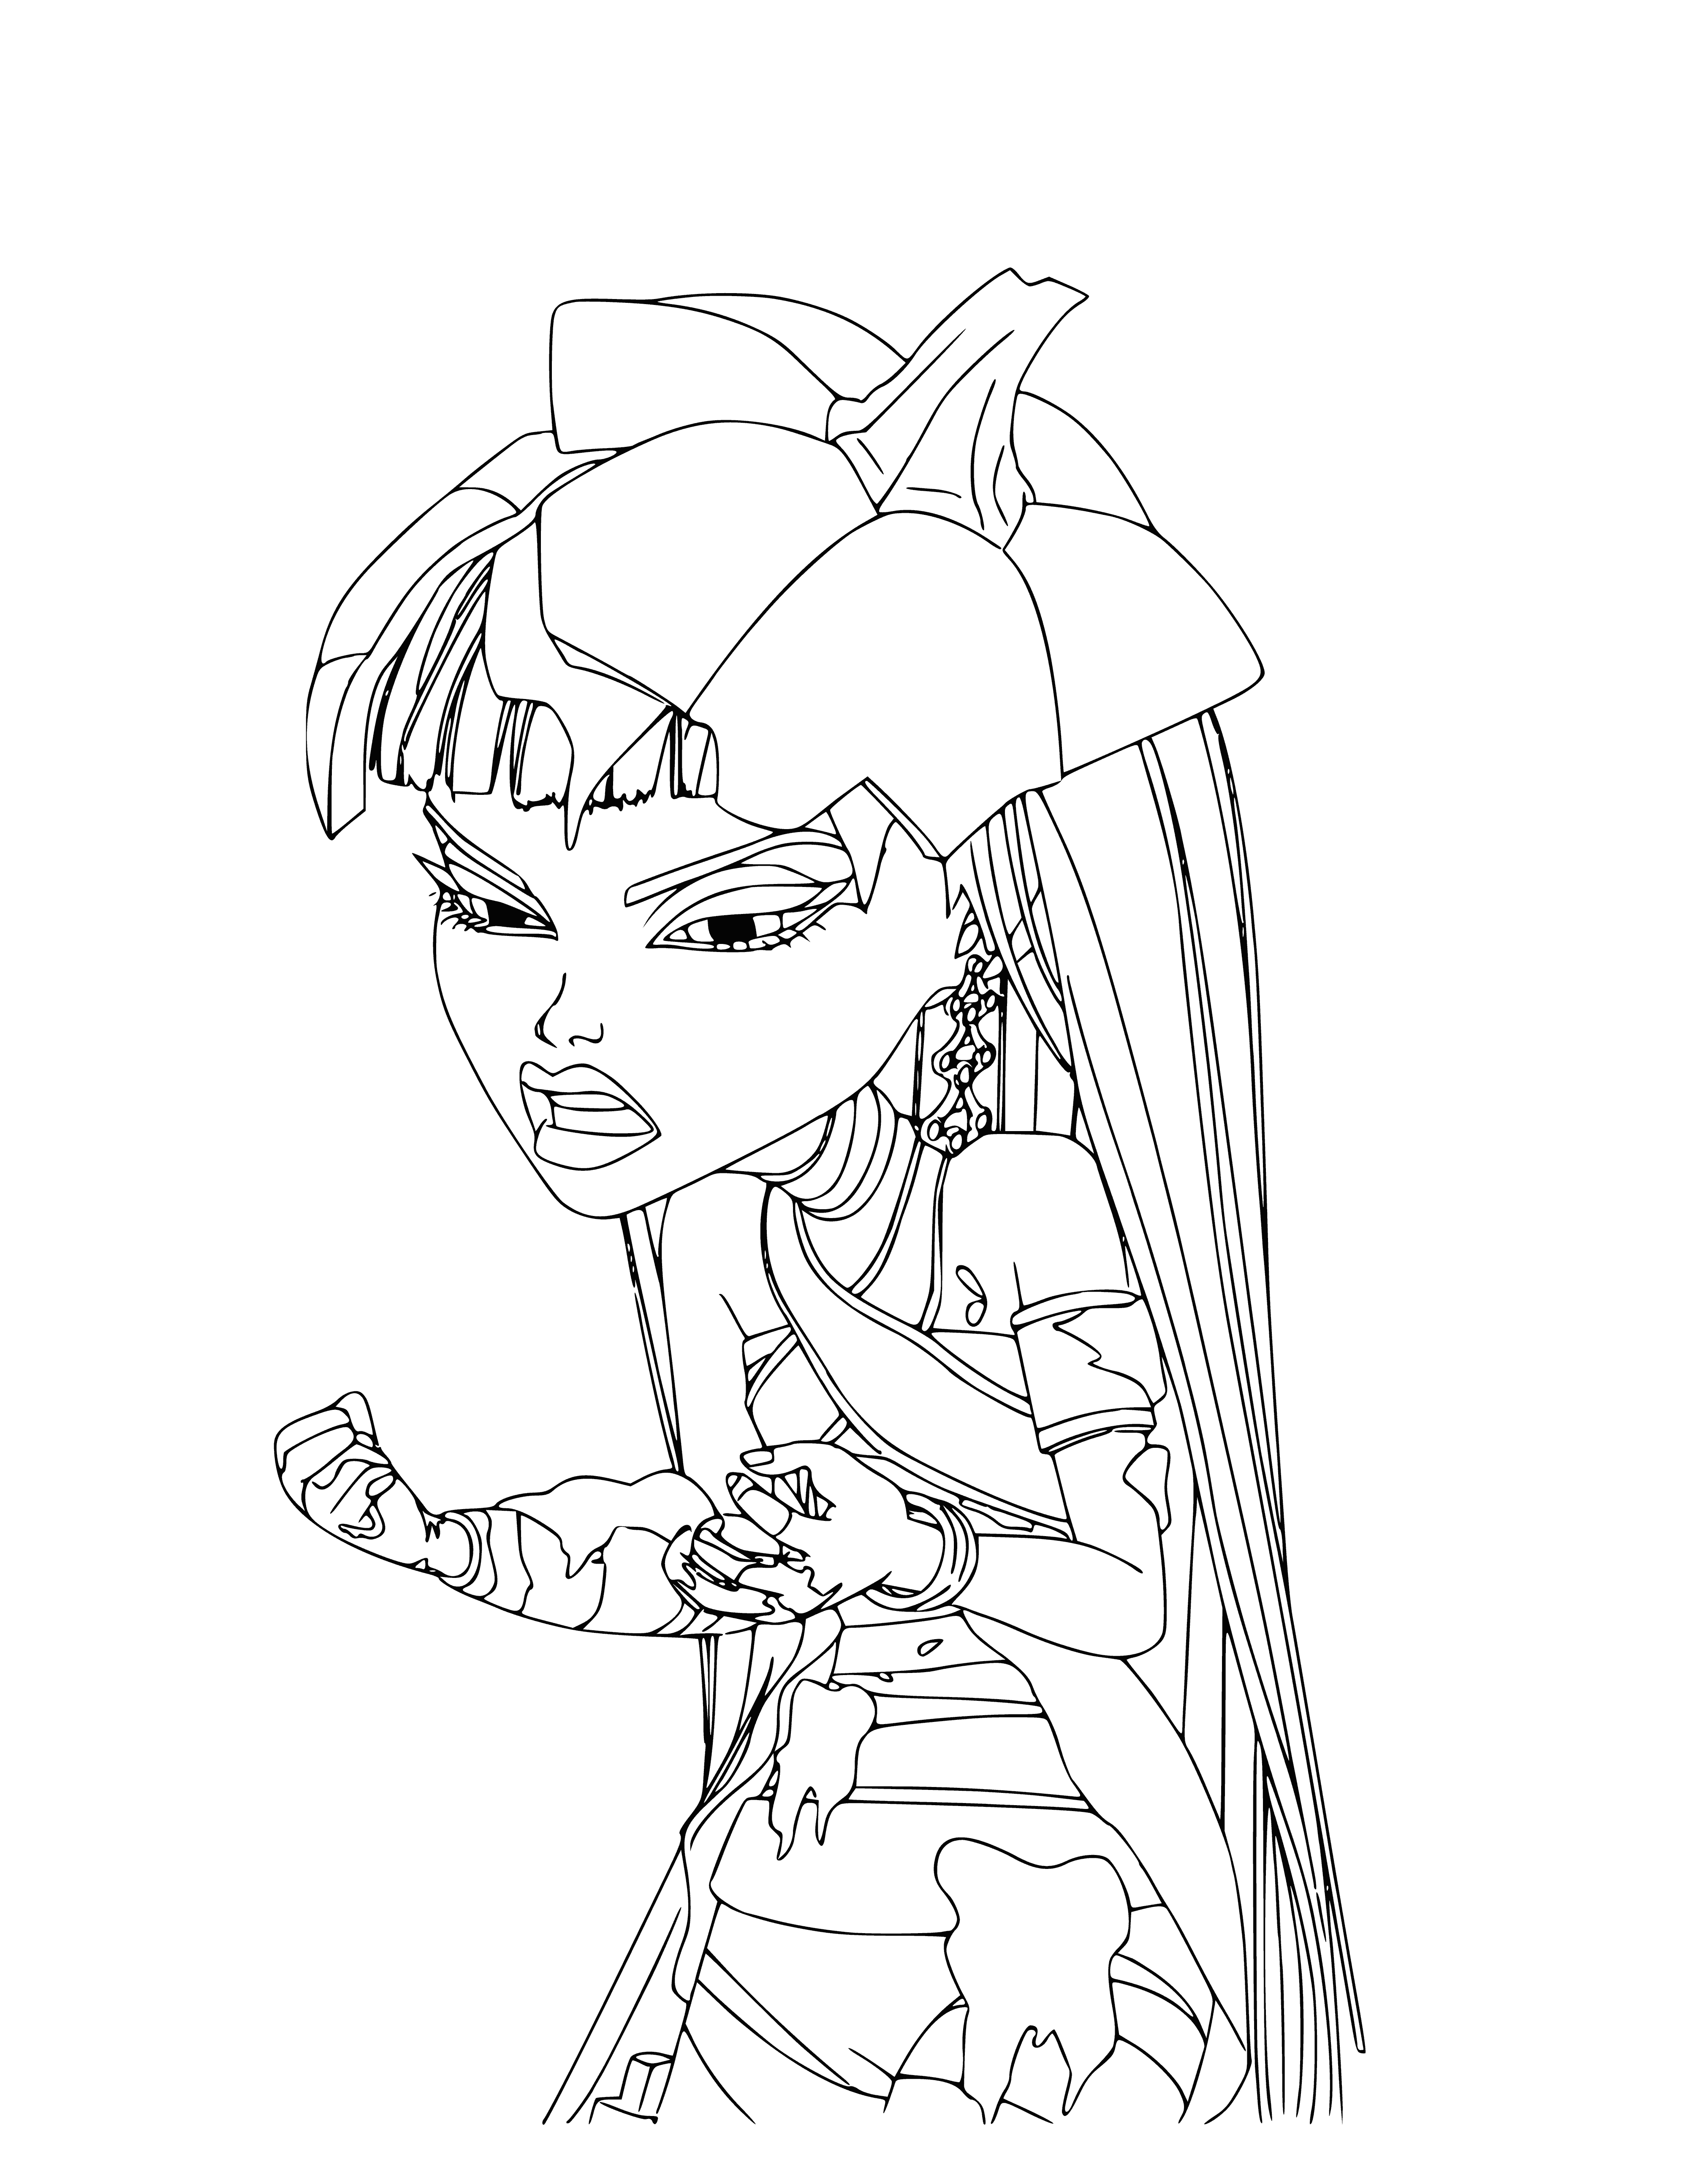 coloring page: Cleo de Nile is a popular Monster High character. She has sleek black hair, pale skin, golden eyes and wears ancient Egyptian-inspired clothing.